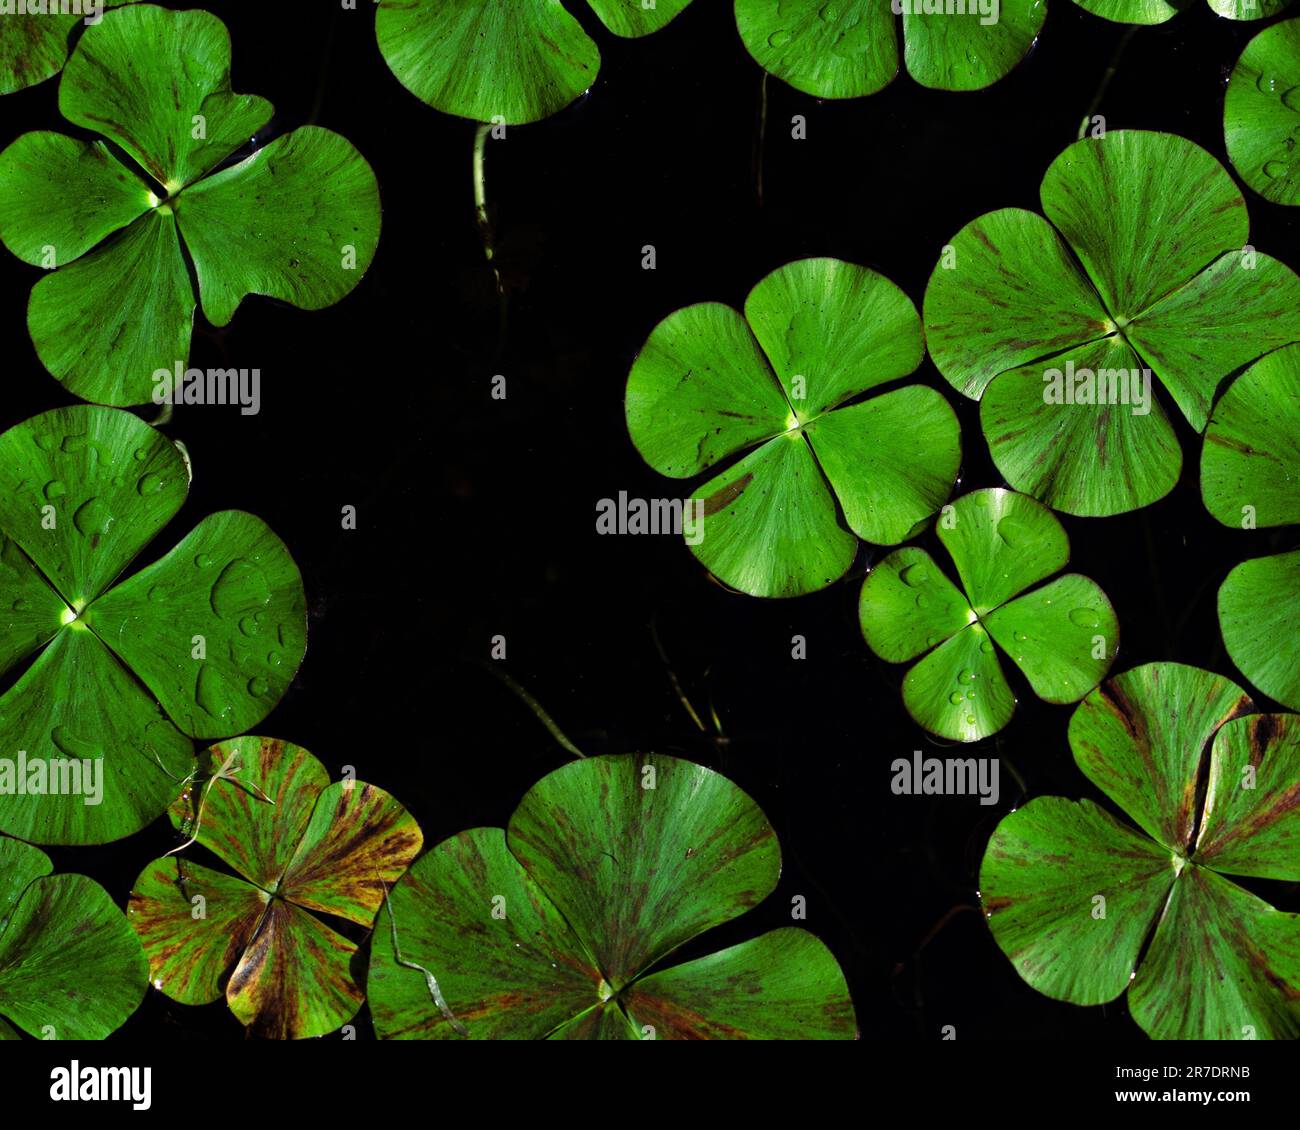 A vibrant green Marsilea Mutica plant is featured against a dark background Stock Photo